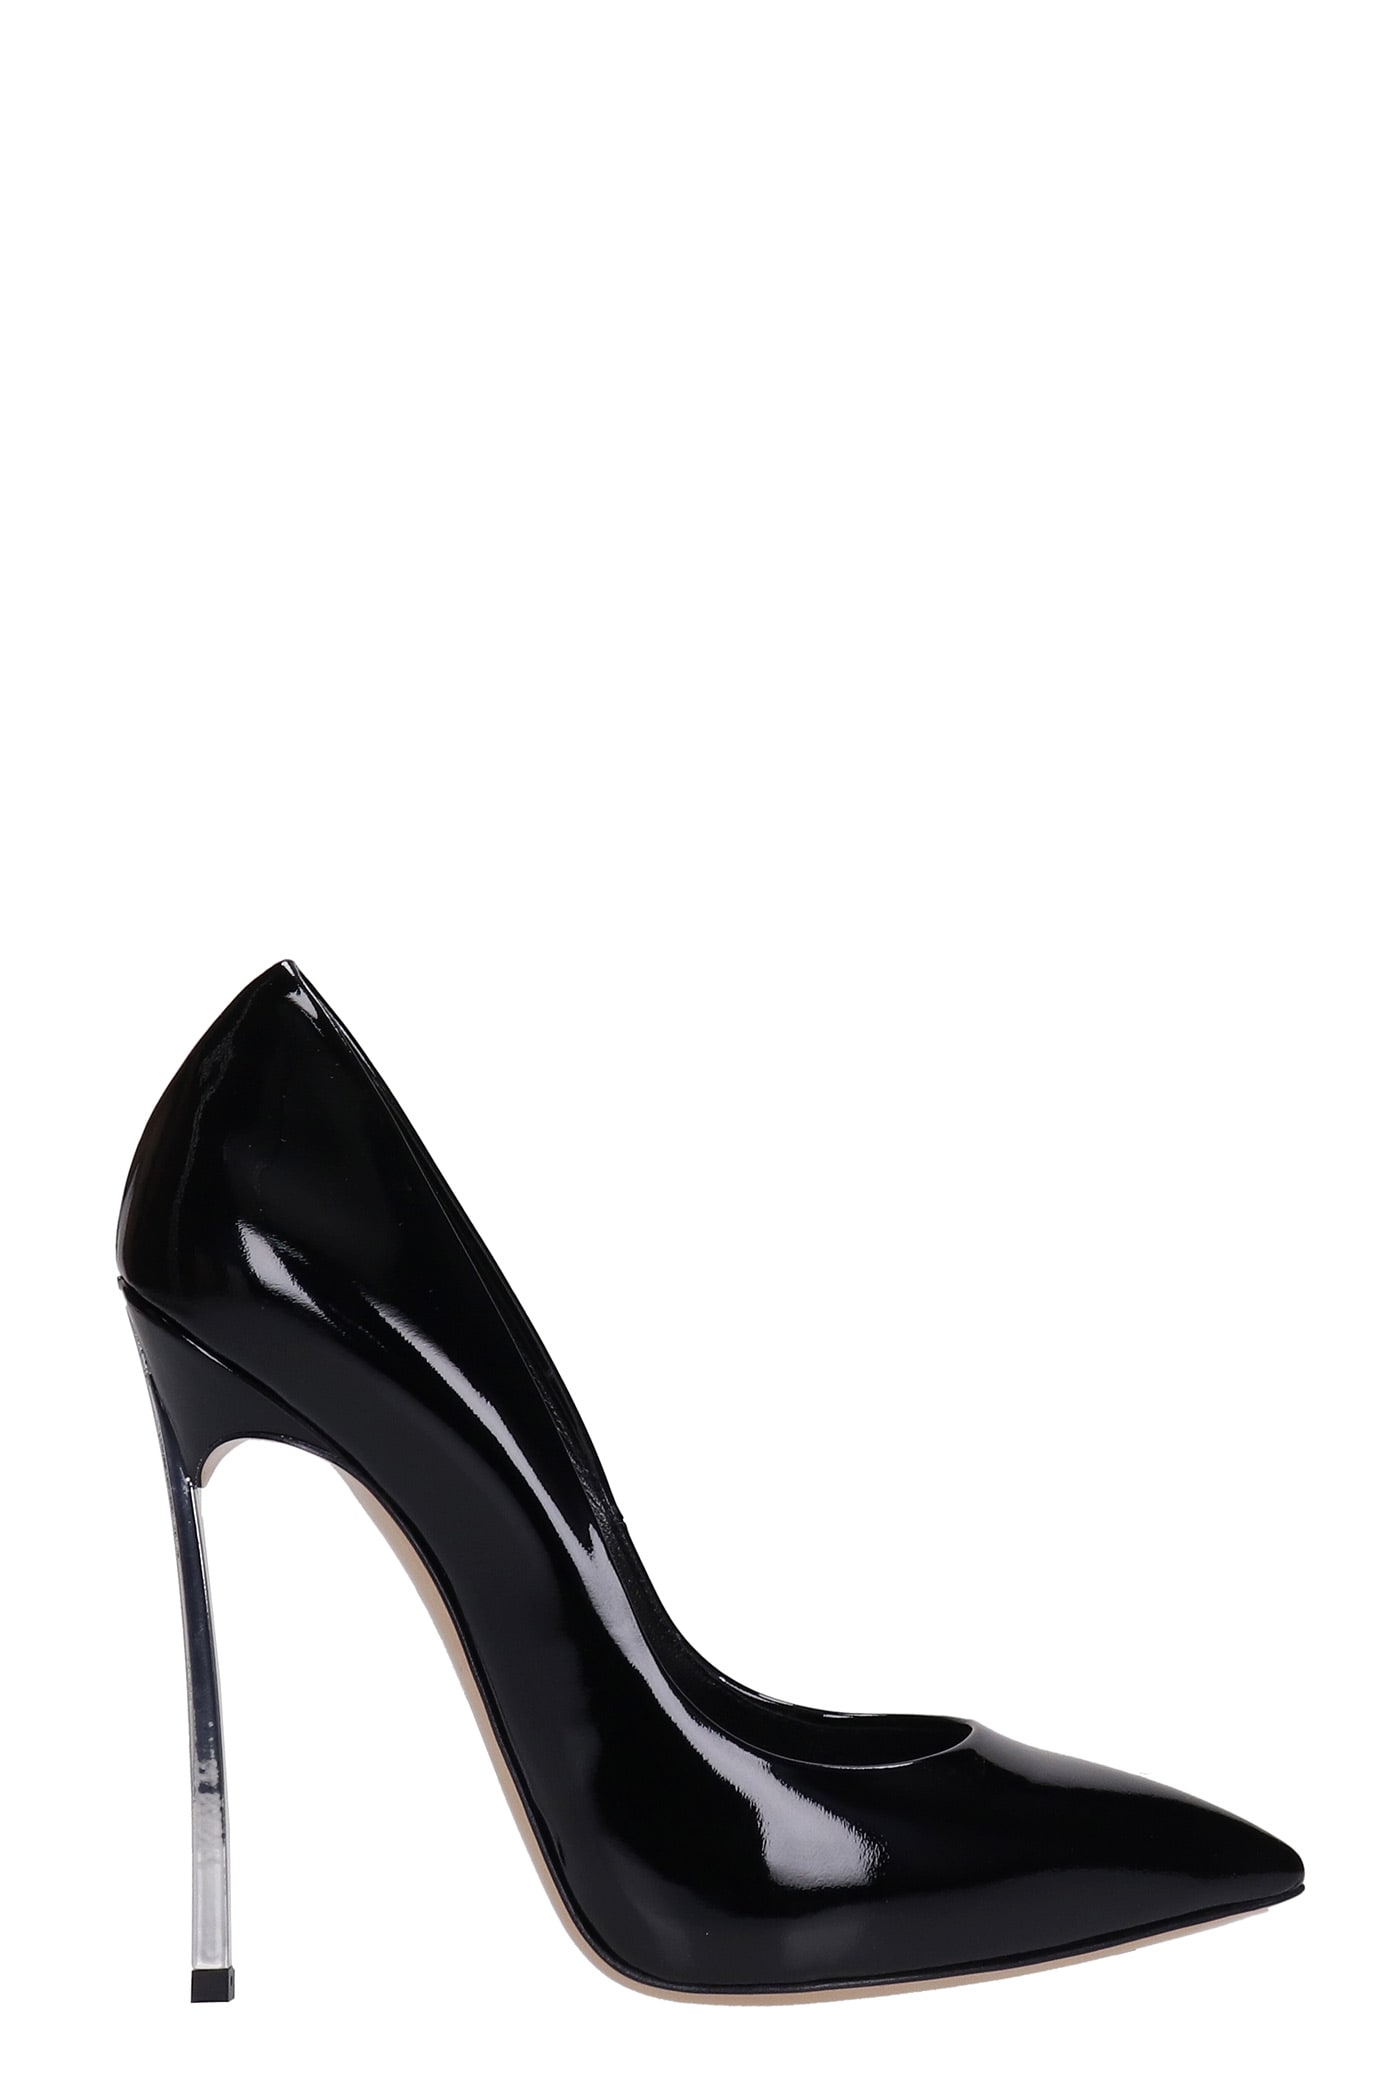 Casadei Pumps In Black Patent Leather